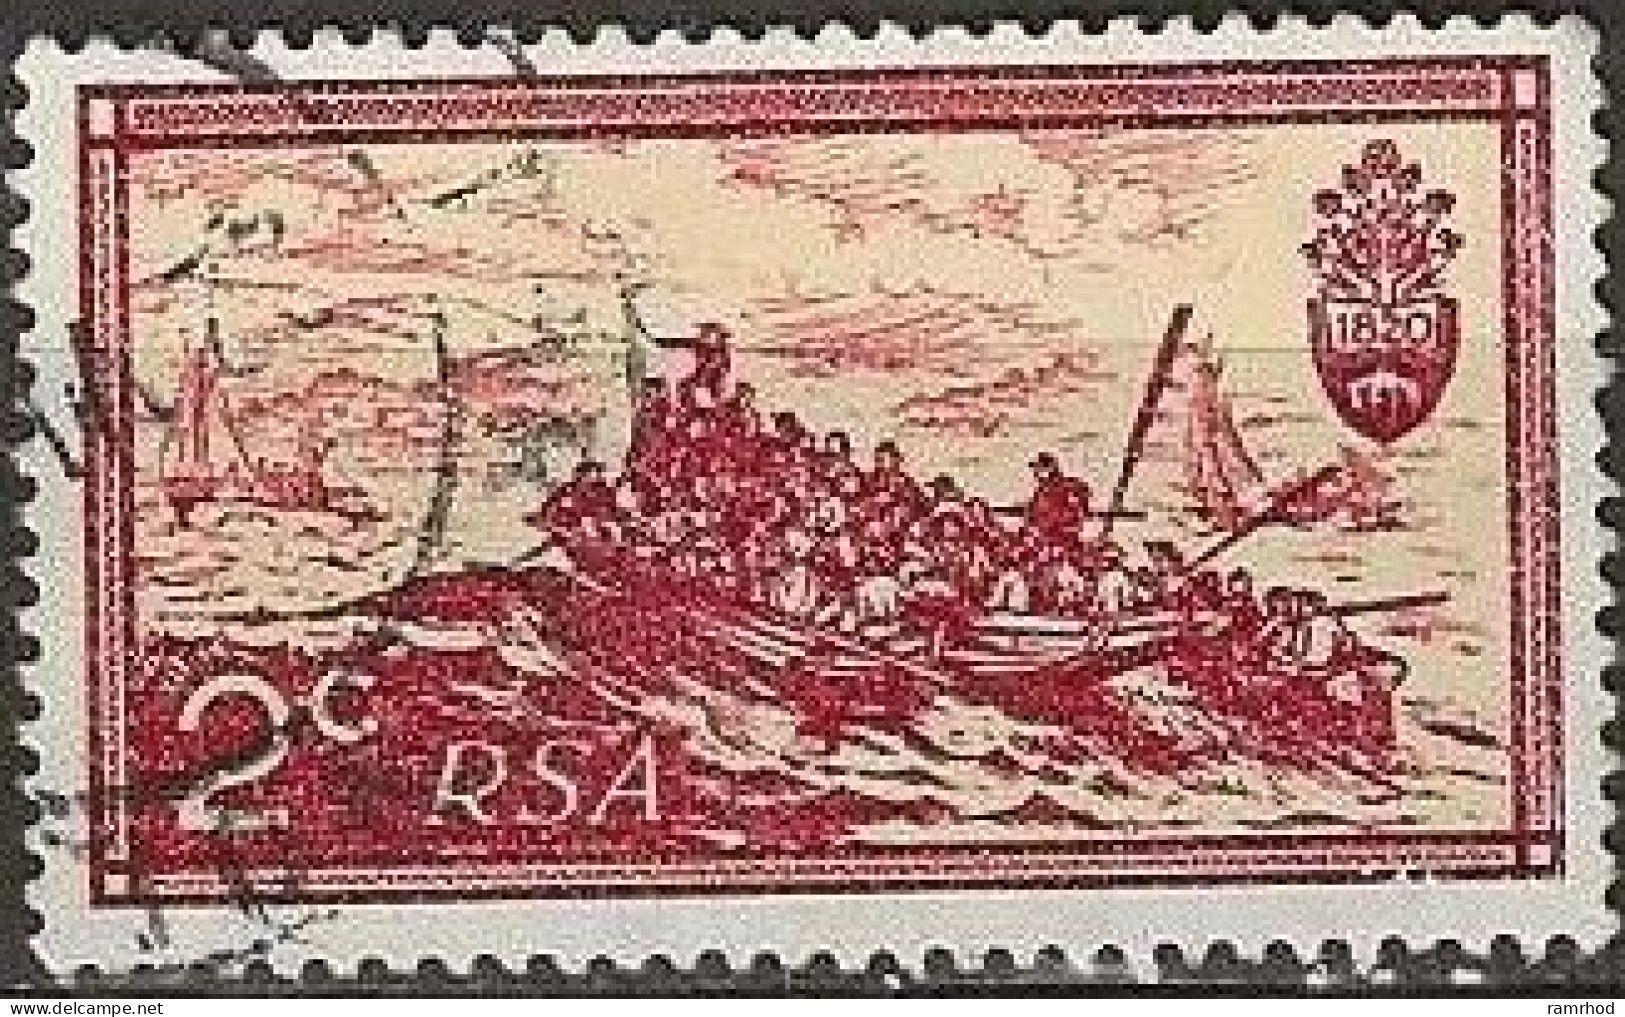 SOUTH AFRICA 1971 Tenth Anniversary Of Republic Of South Africa. - 2c Landing Of British Settlers, 1820 (T. Baines) FU - Oblitérés